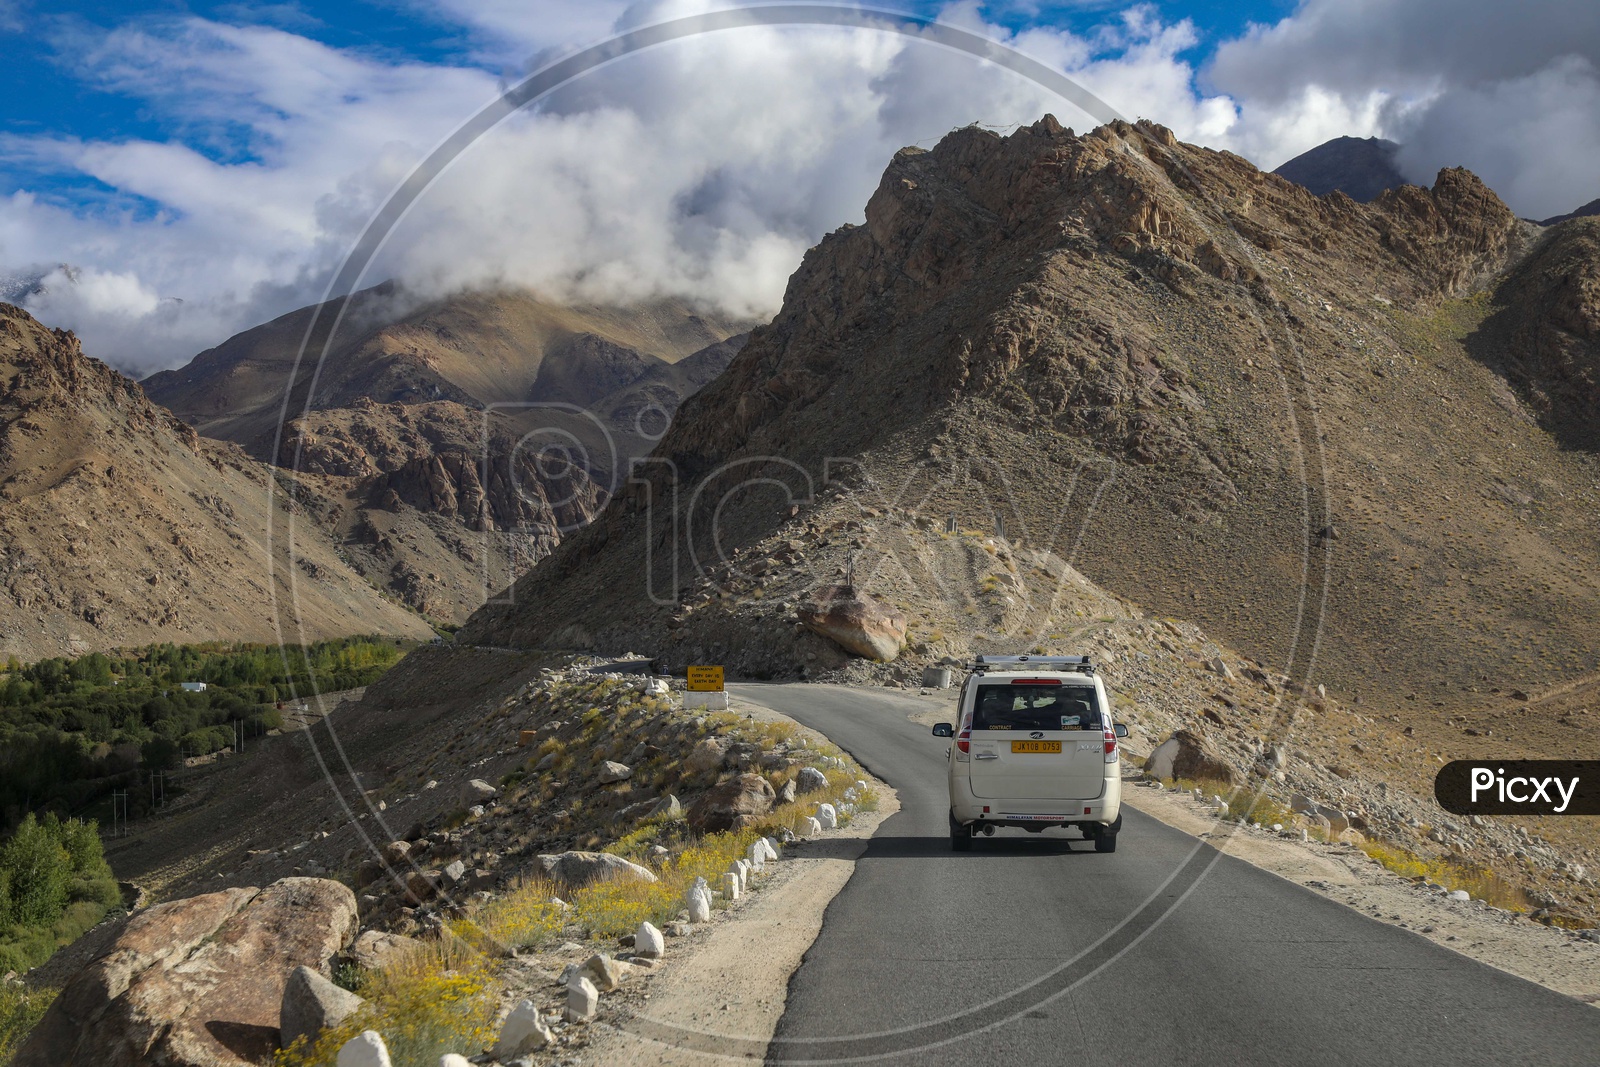 Moving cab on the roadway by the mountain